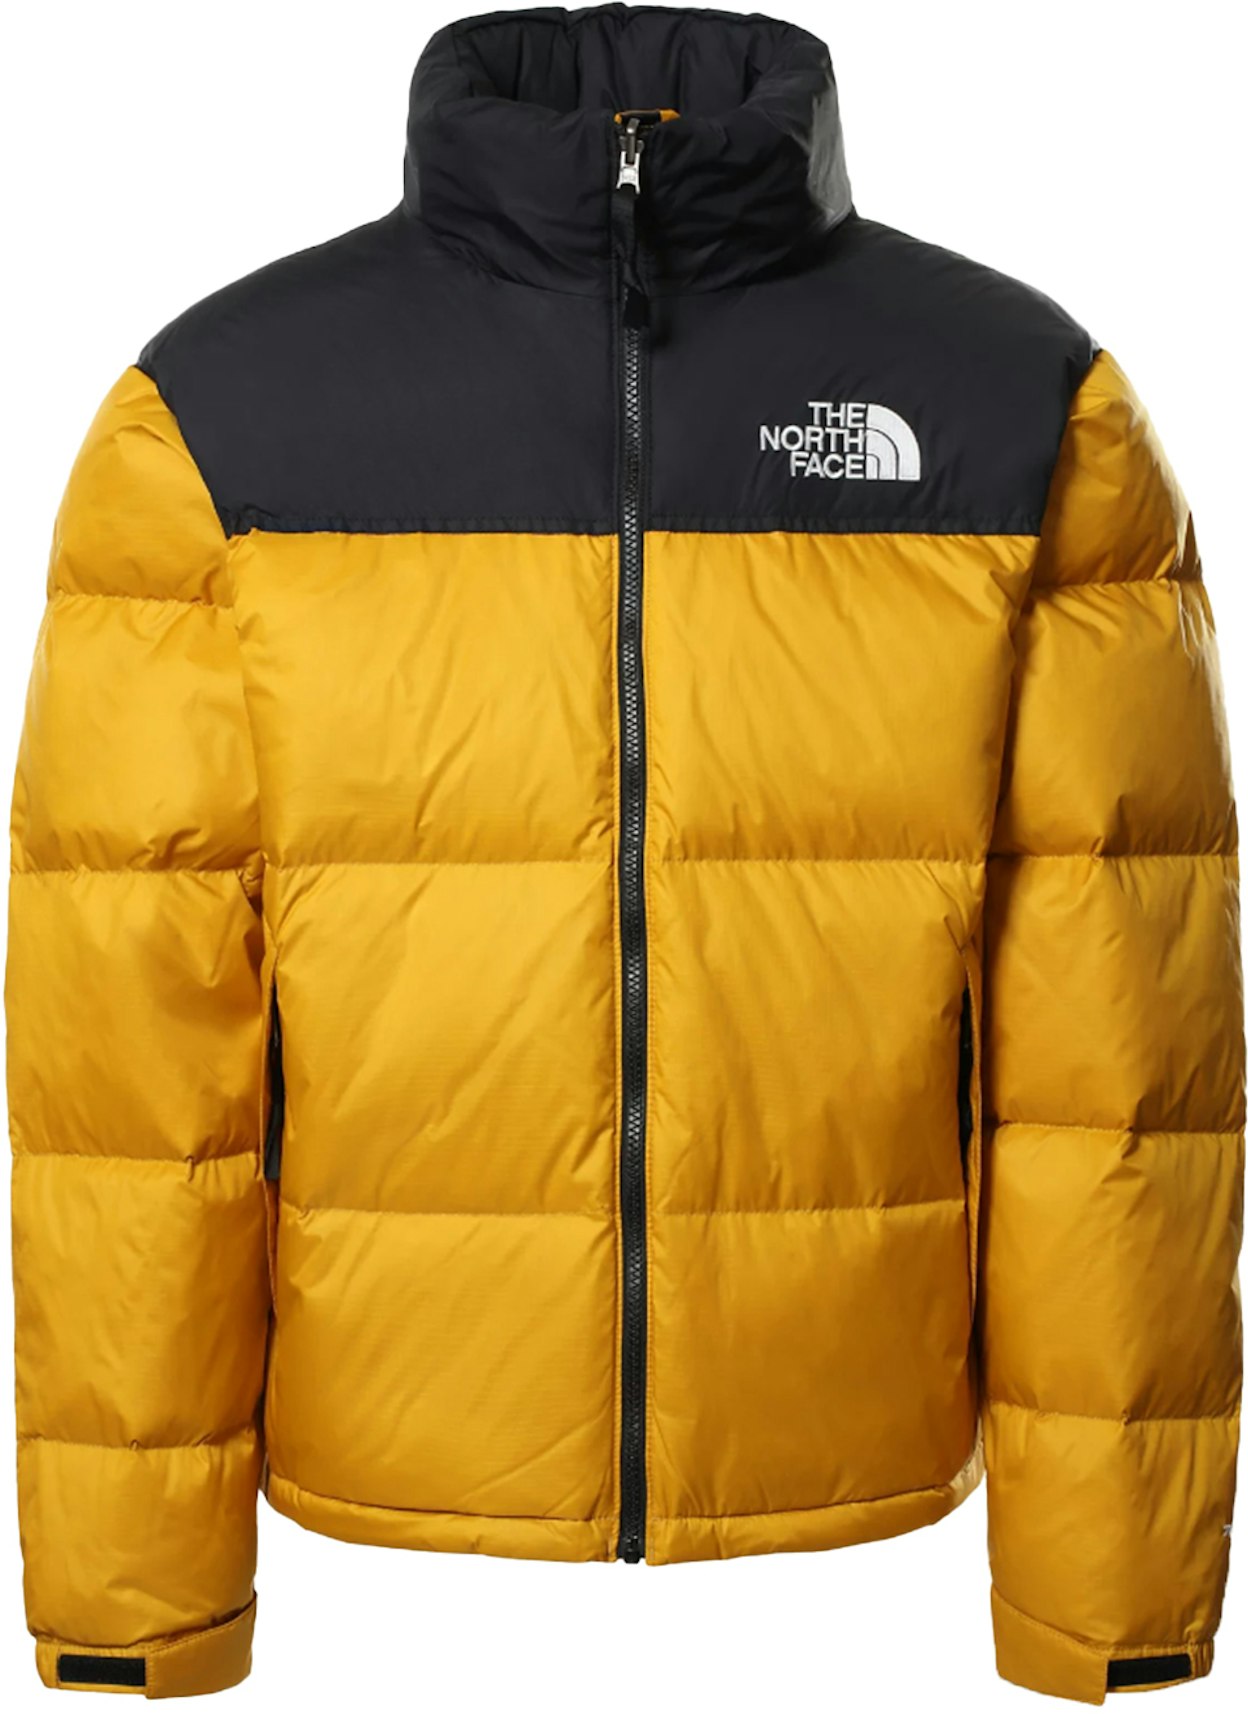 Buy The North Face Jackets, Shirts and More -